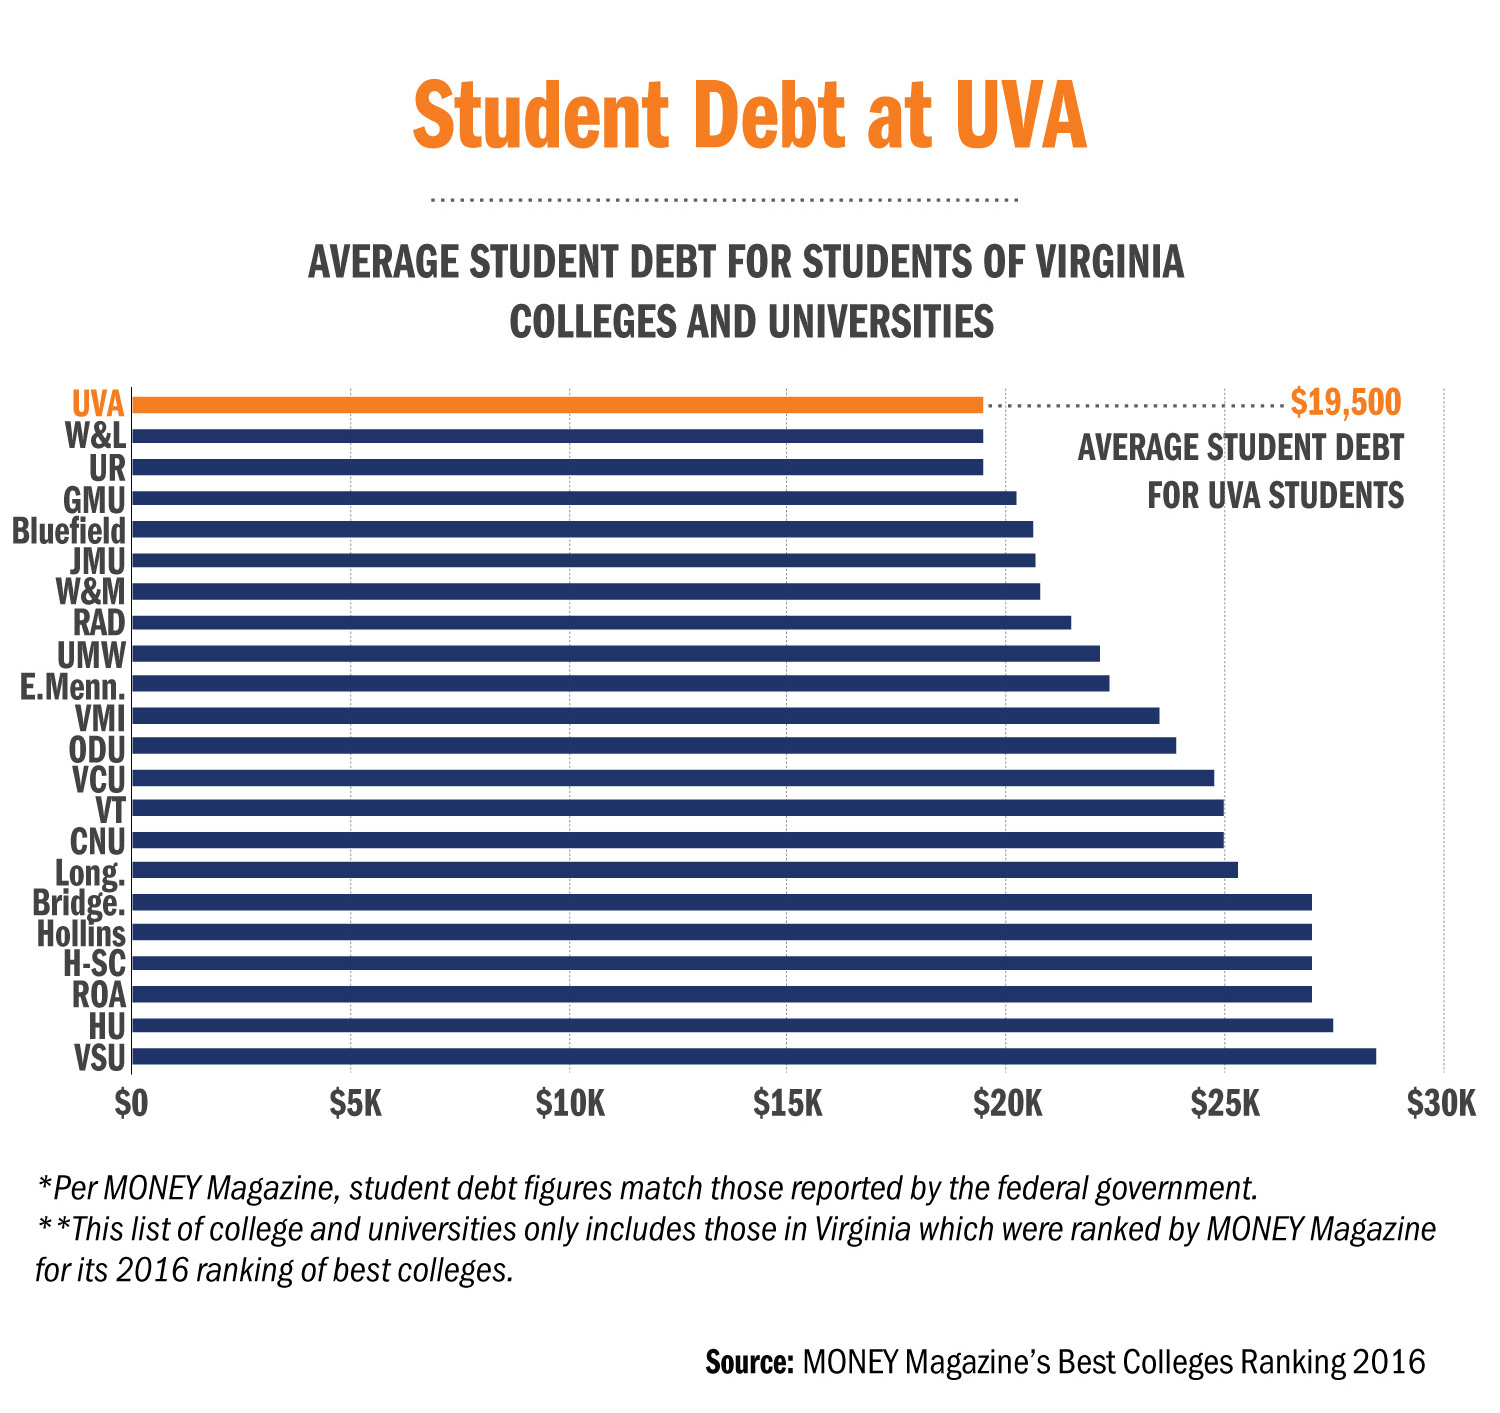 Graph showing the average student dept for students of Virginia Colleges and Universities.  College going vertical and price going horizontal